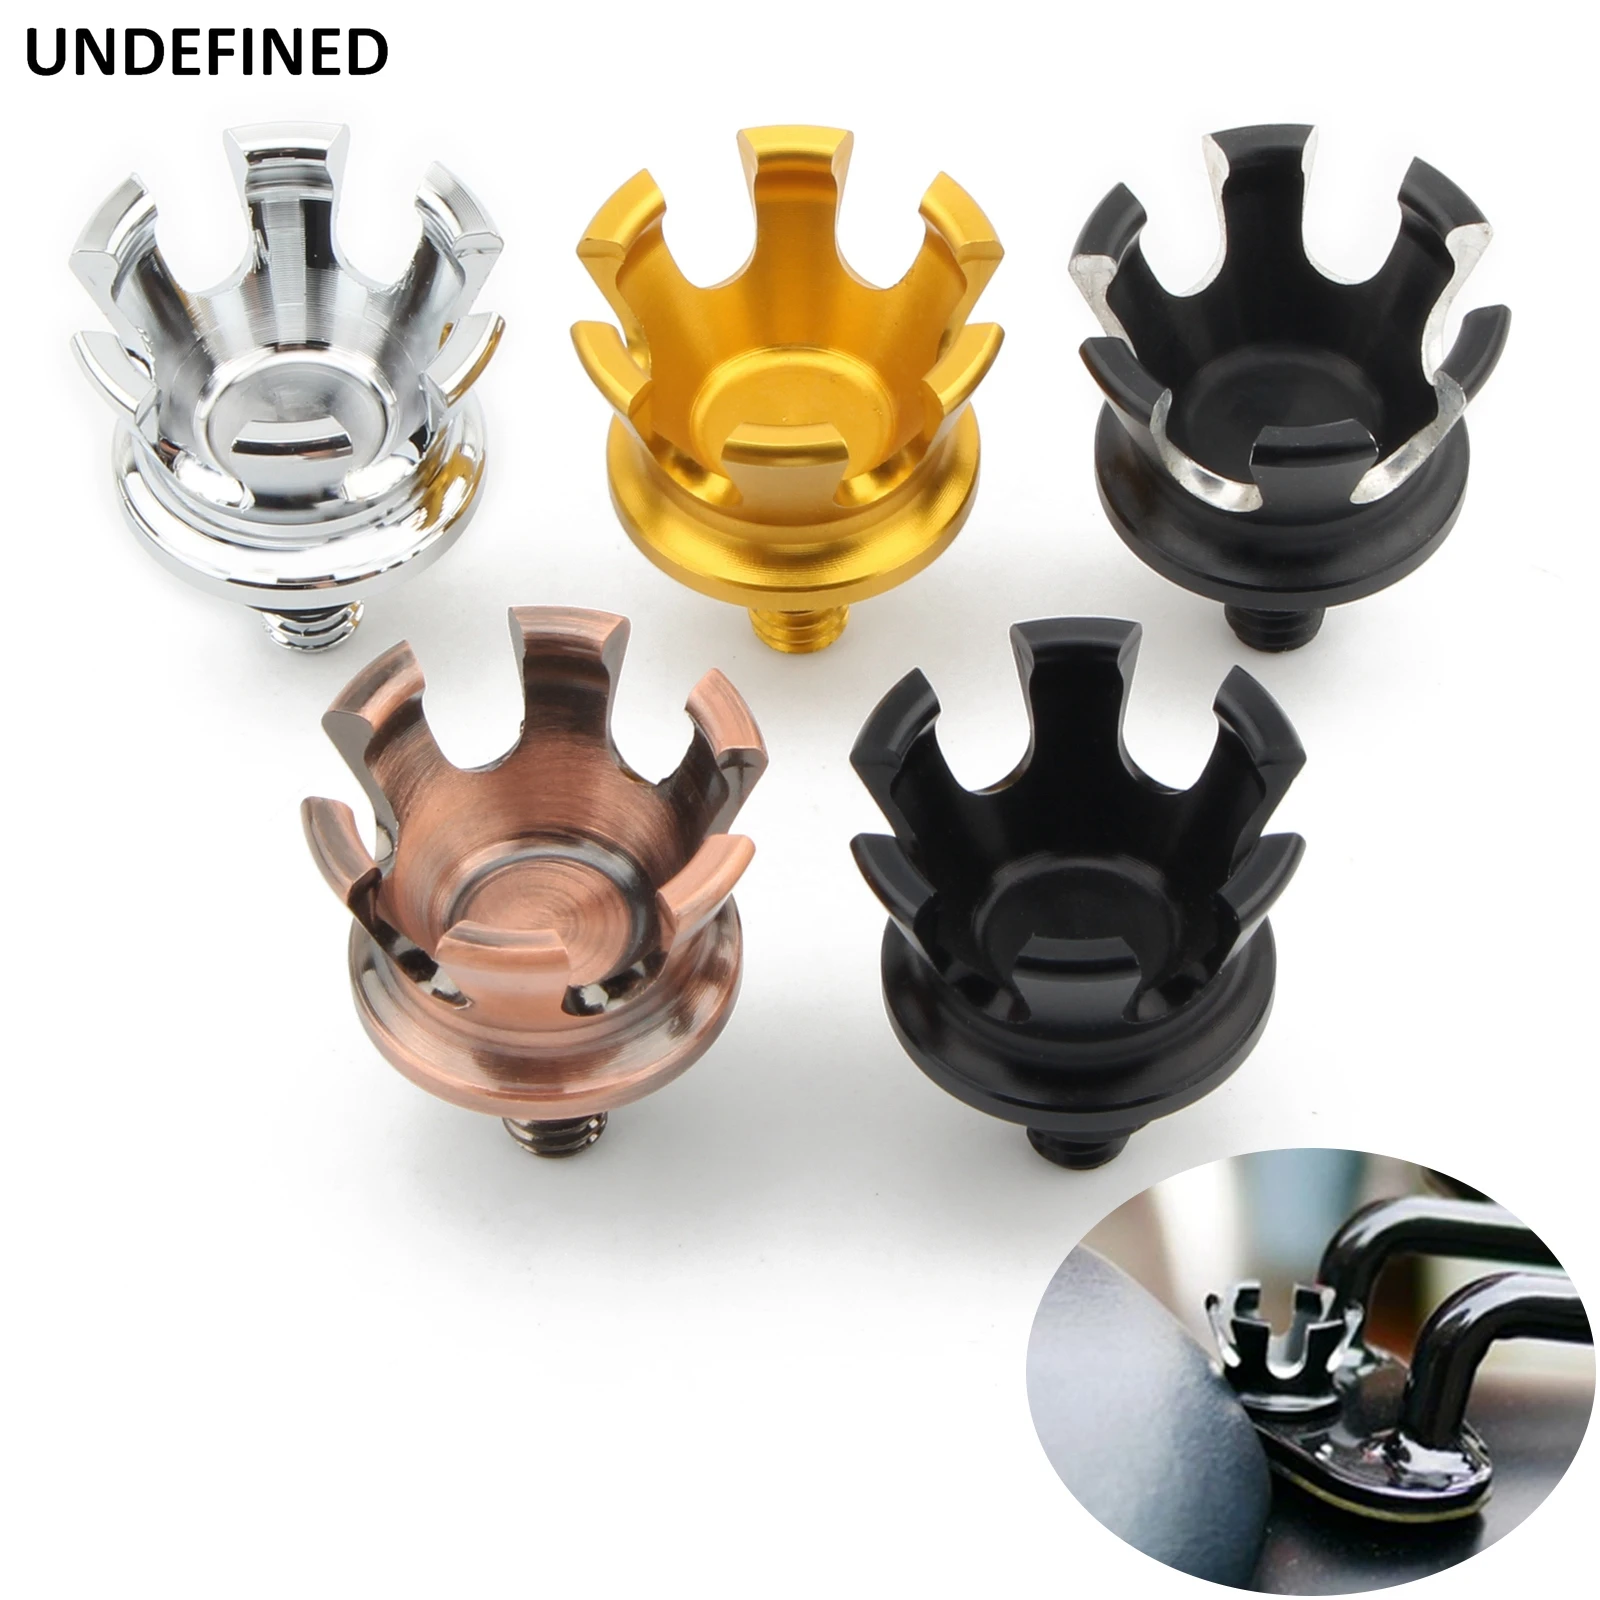 

Motorcycle Crown Style Seat Bolt Screw Nuts Mount Knob Cover for Harley Sportster Dyna Fatboy Road King Softail Street Bob 96-21